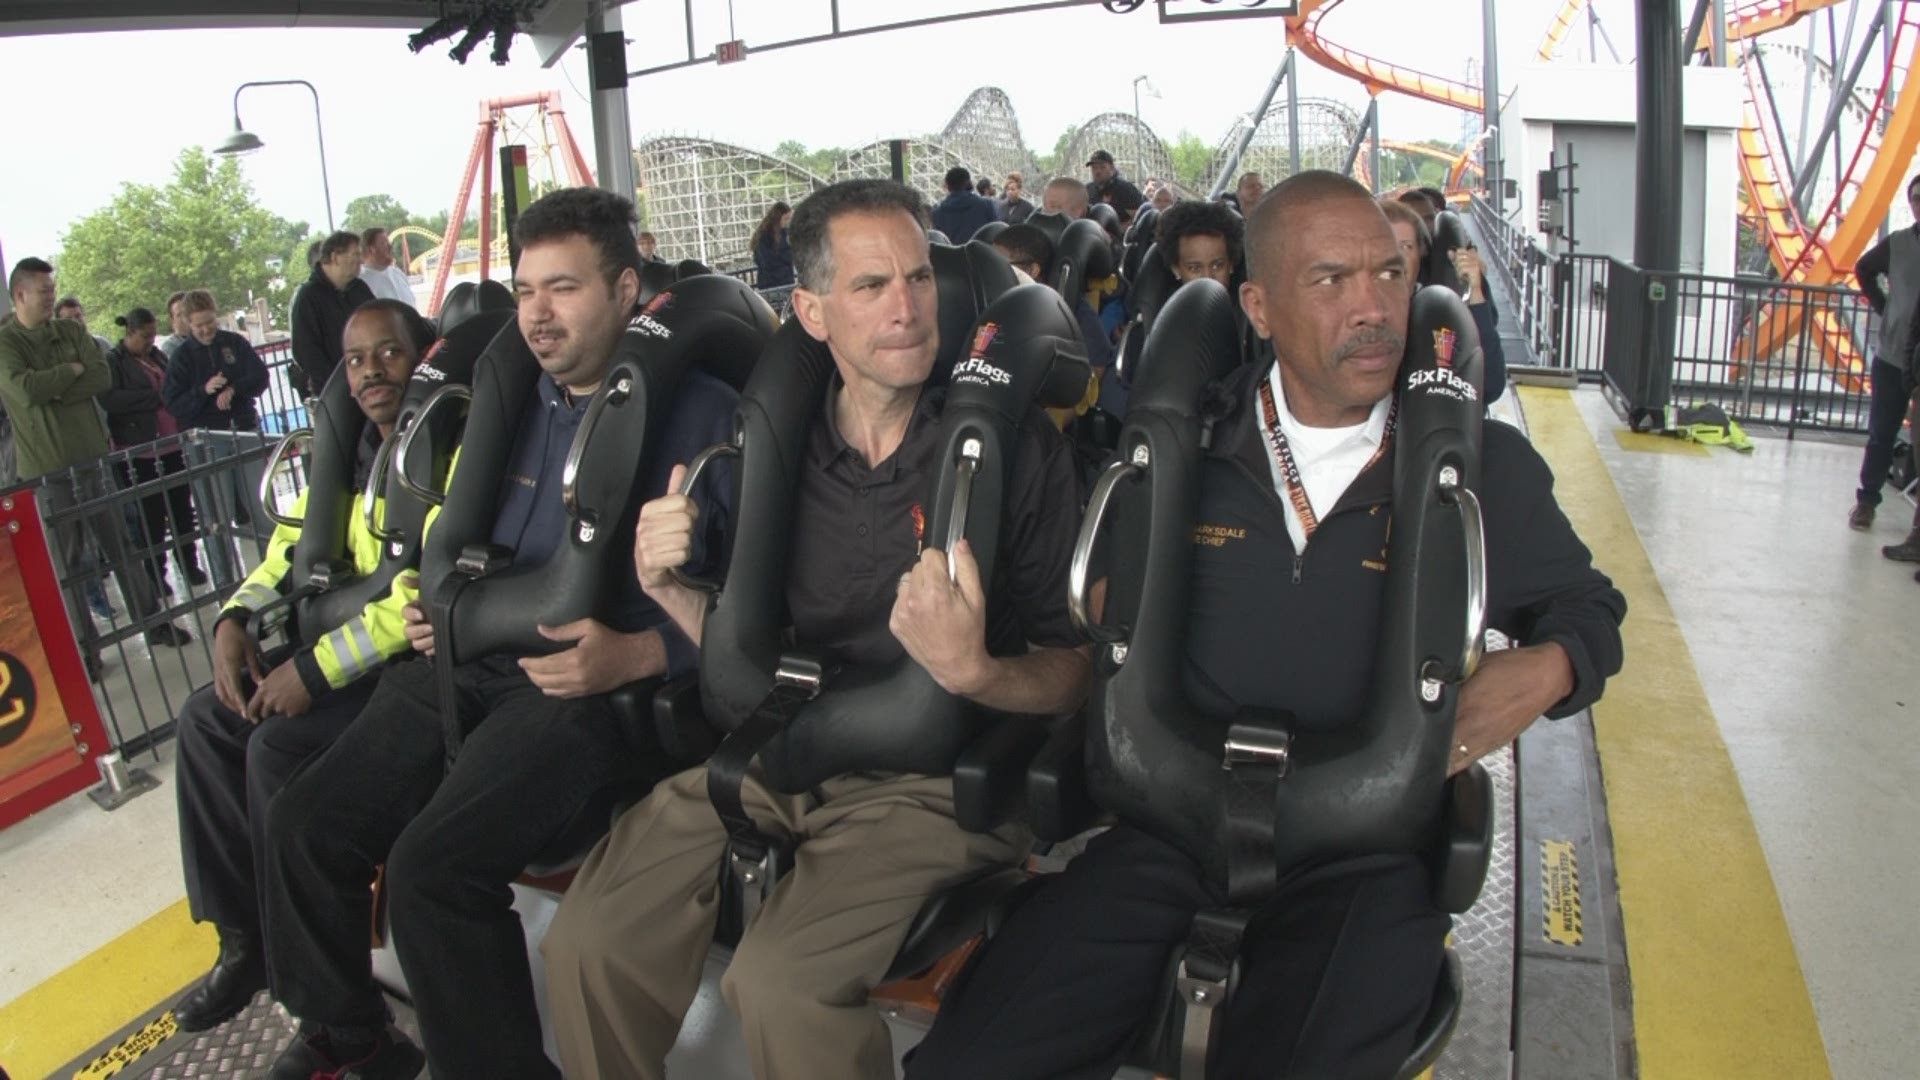 The fire and EMS teams rode the new Firebird Six Flags coaster.